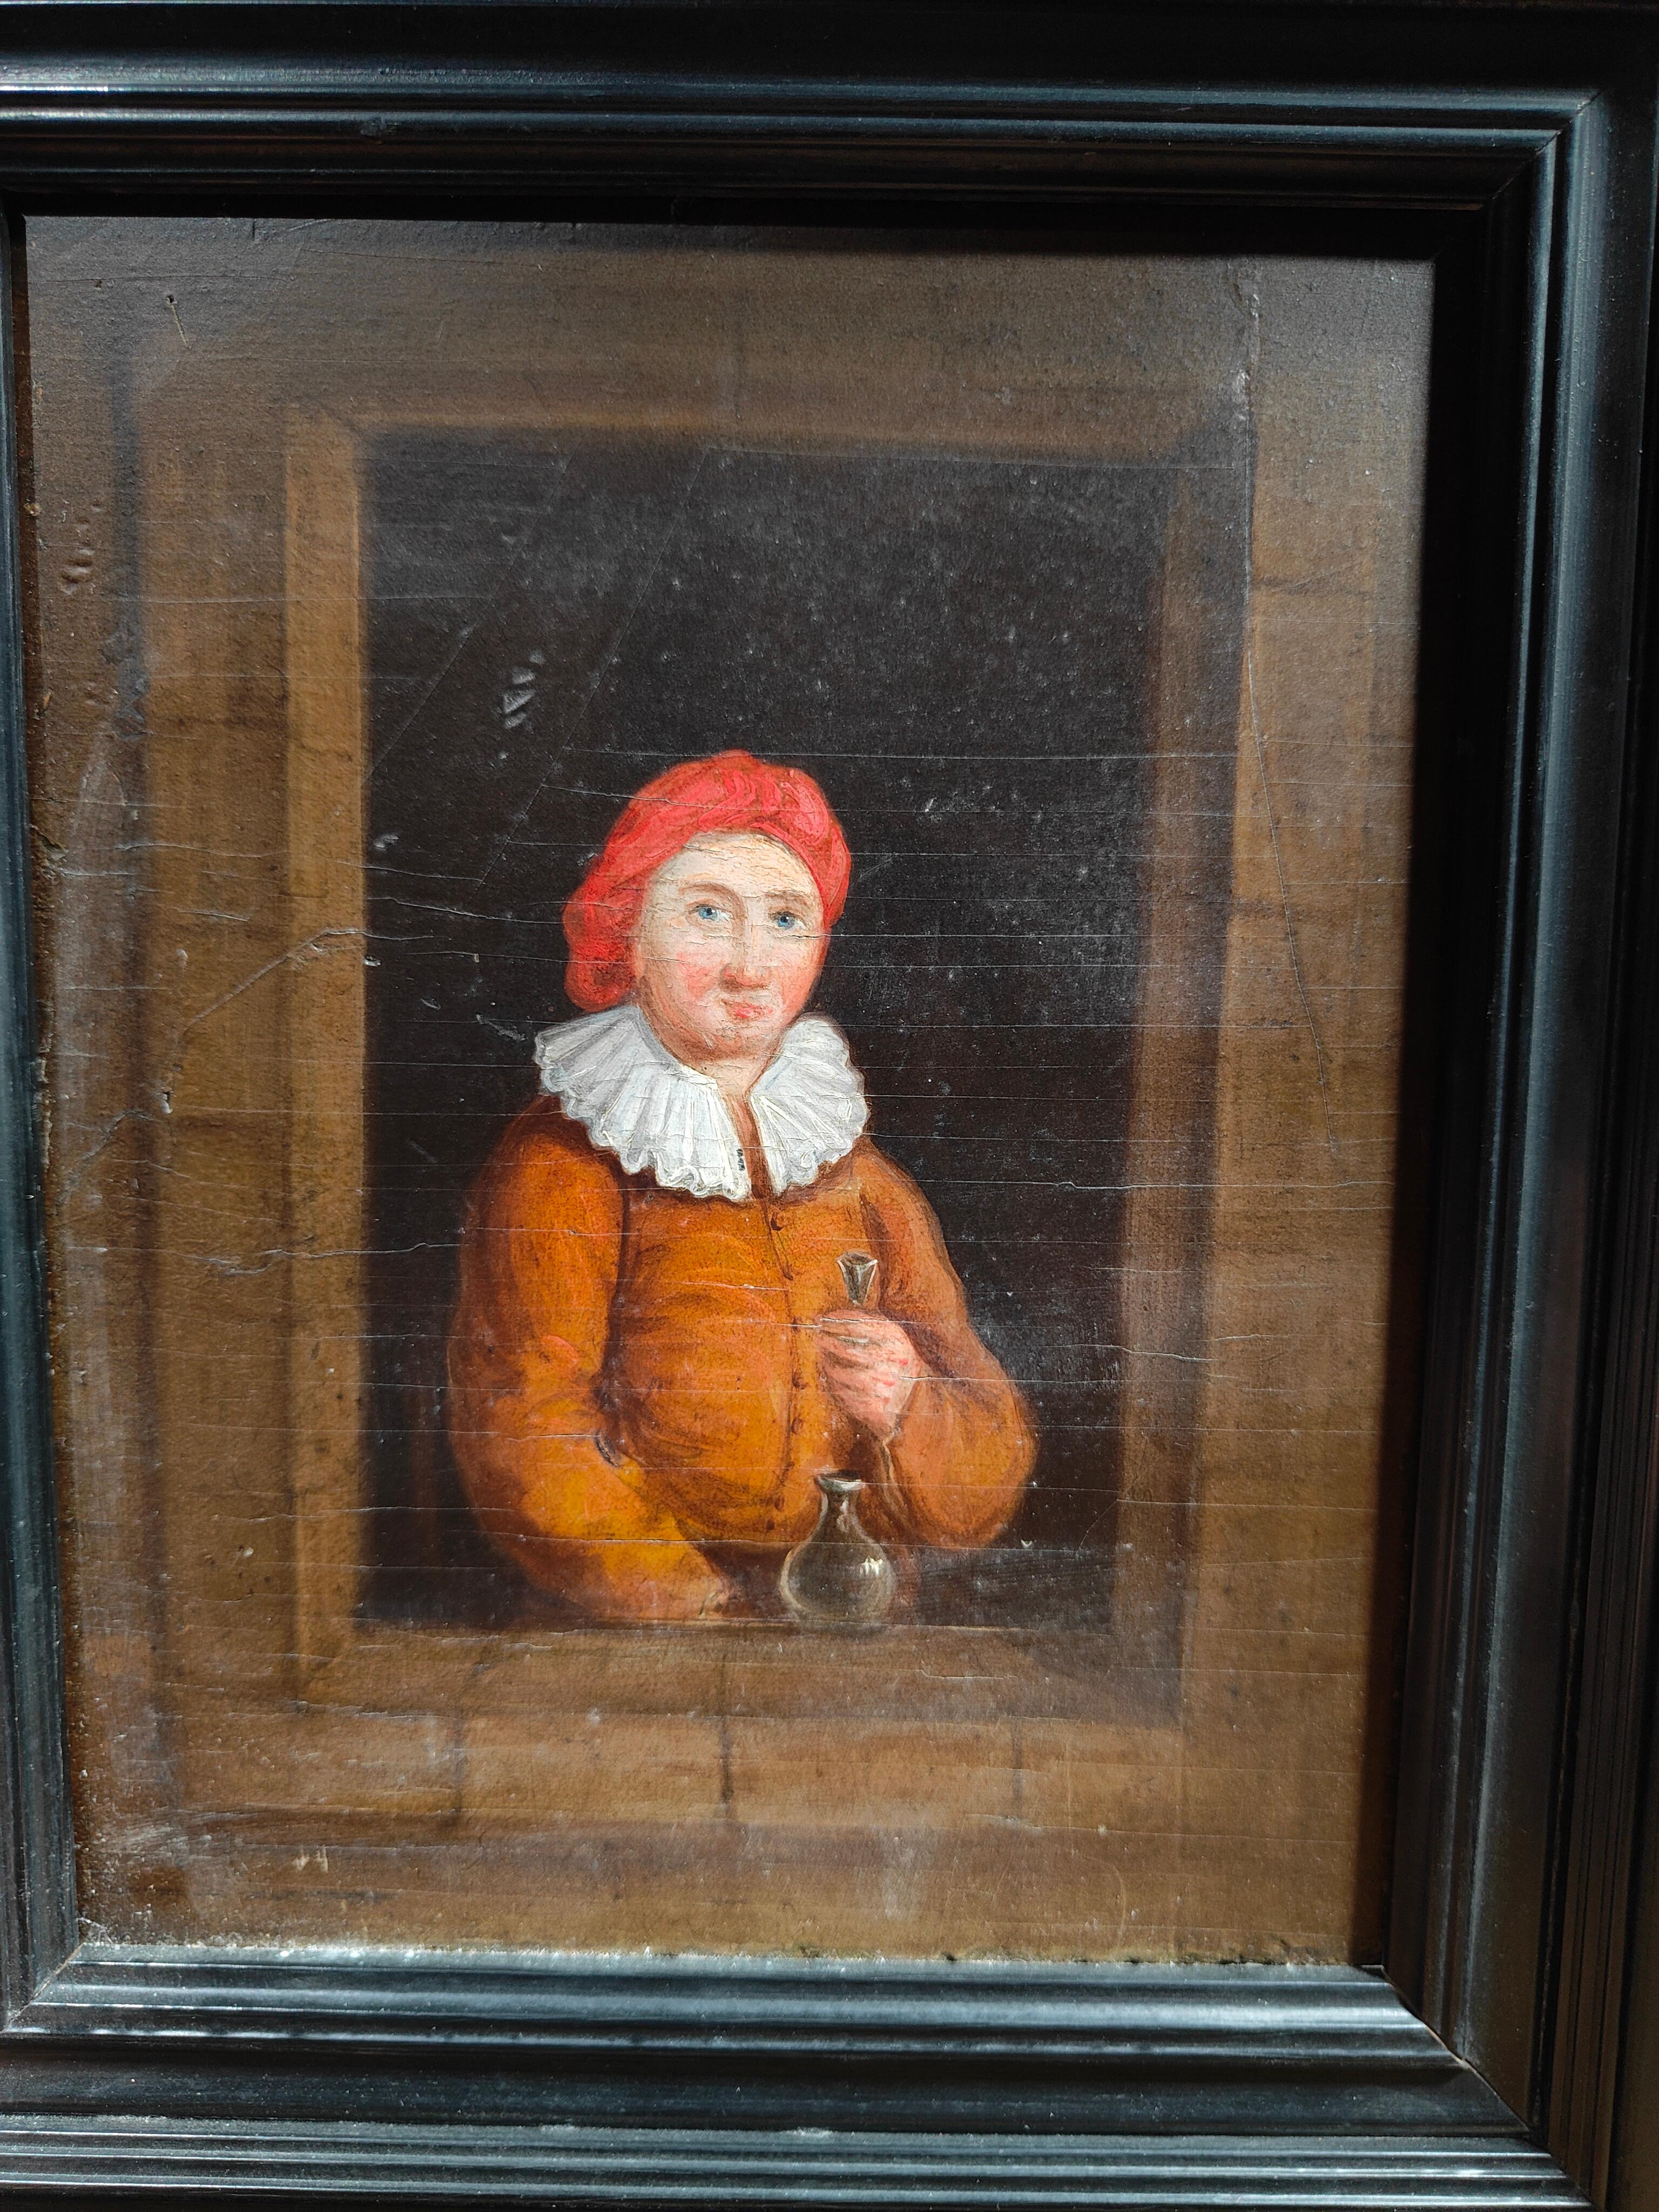 Fruitwood 17th Century Dutch Portrait - Oil on Wood Panel with Black Painted Frame For Sale